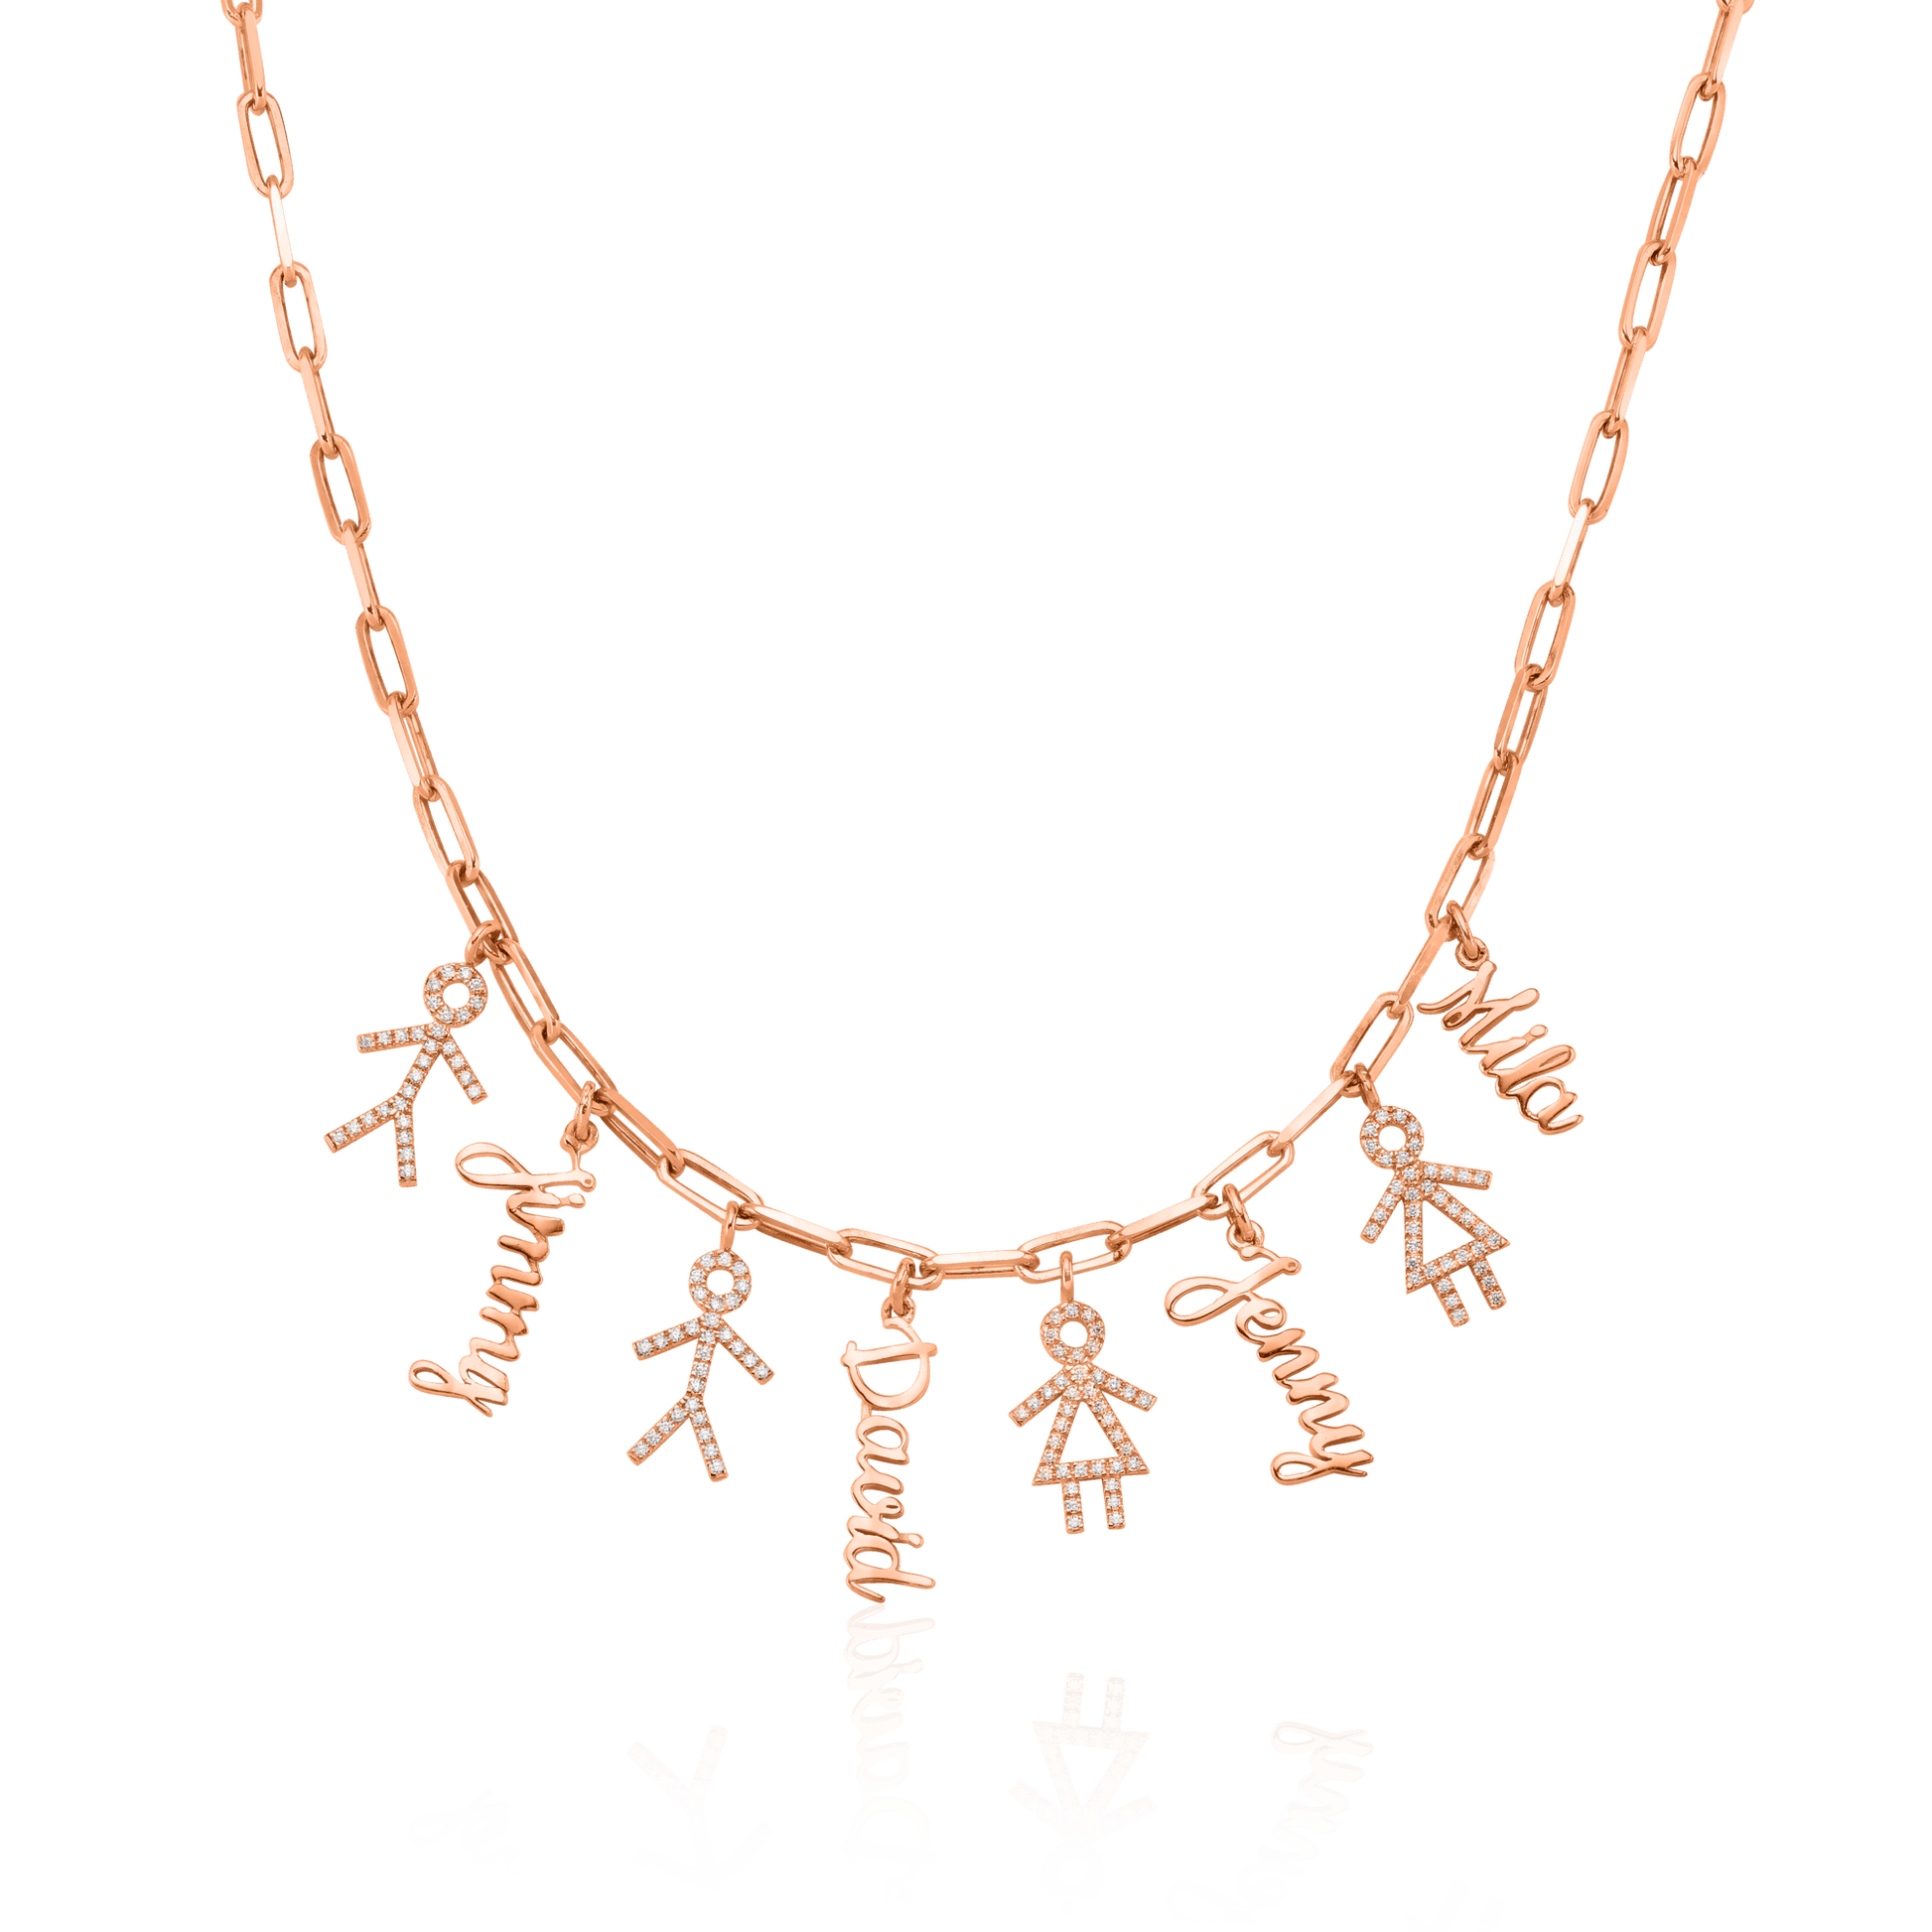 Kith & Kin Necklace - 18K Rose Vermeil Necklaces Gold Vermeil Natural White Sapphire 1 Kid + 1 Name Small - 16 Inches (40cm)